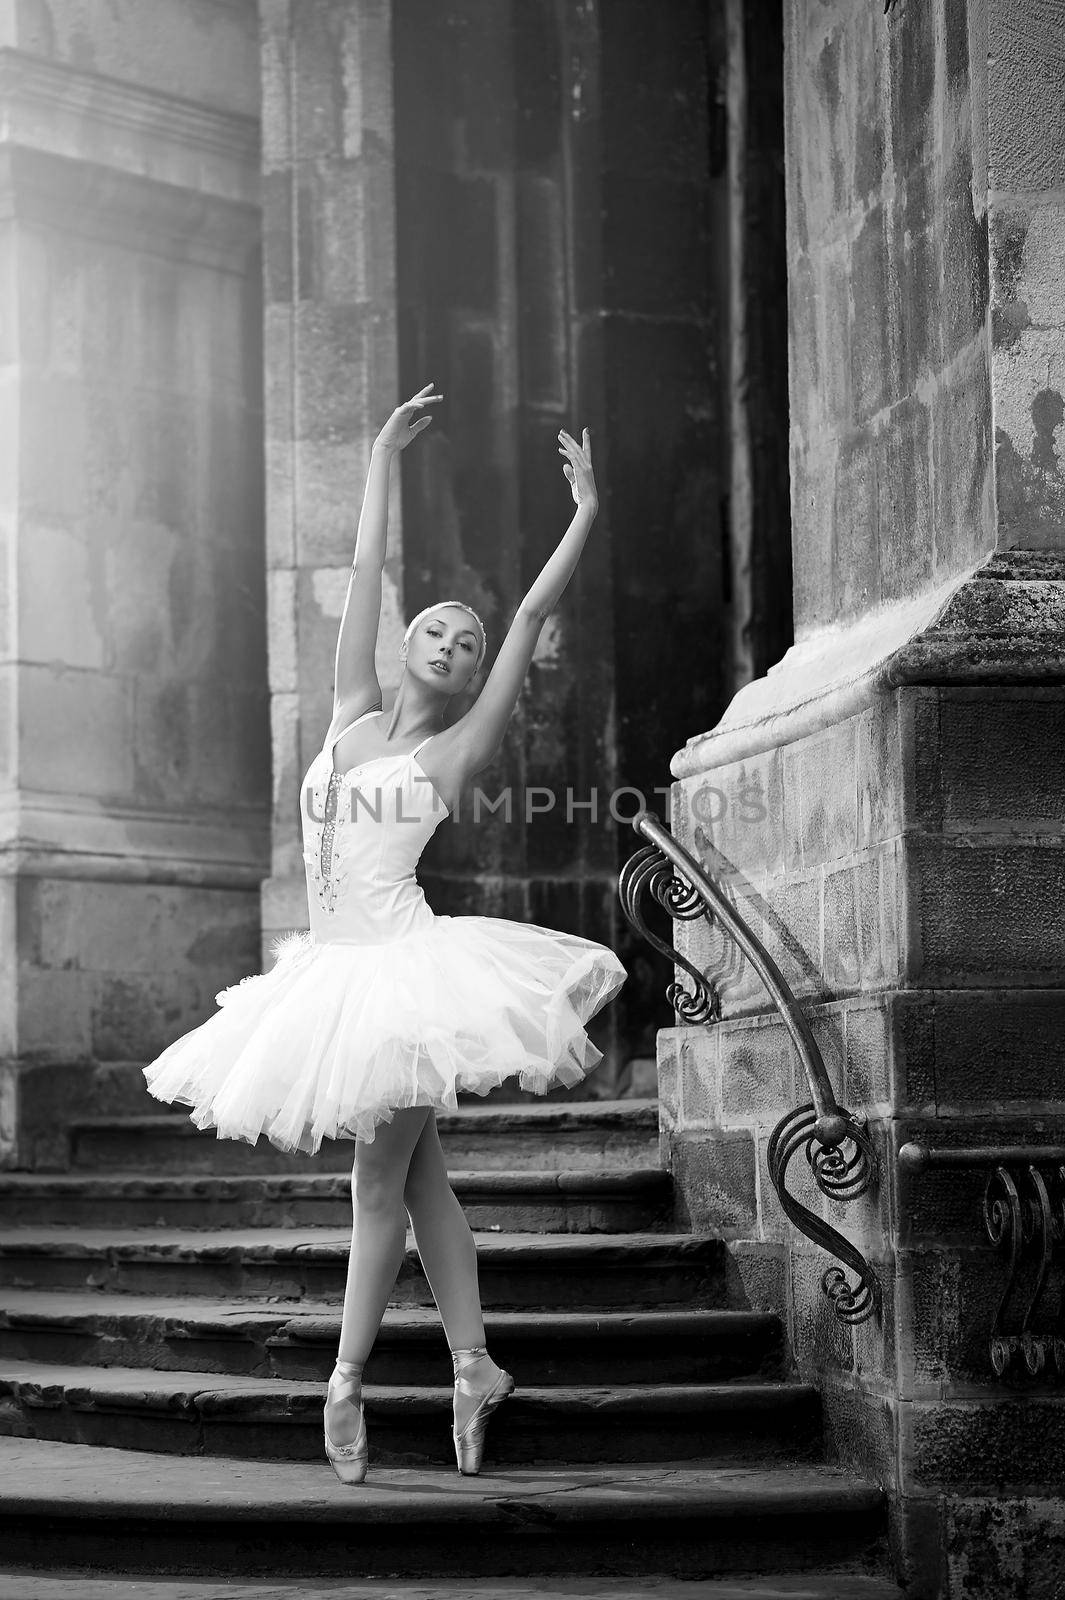 Balance is crucial. Monochrome soft focus shot of a young ballerina performing on the stairs of an old house